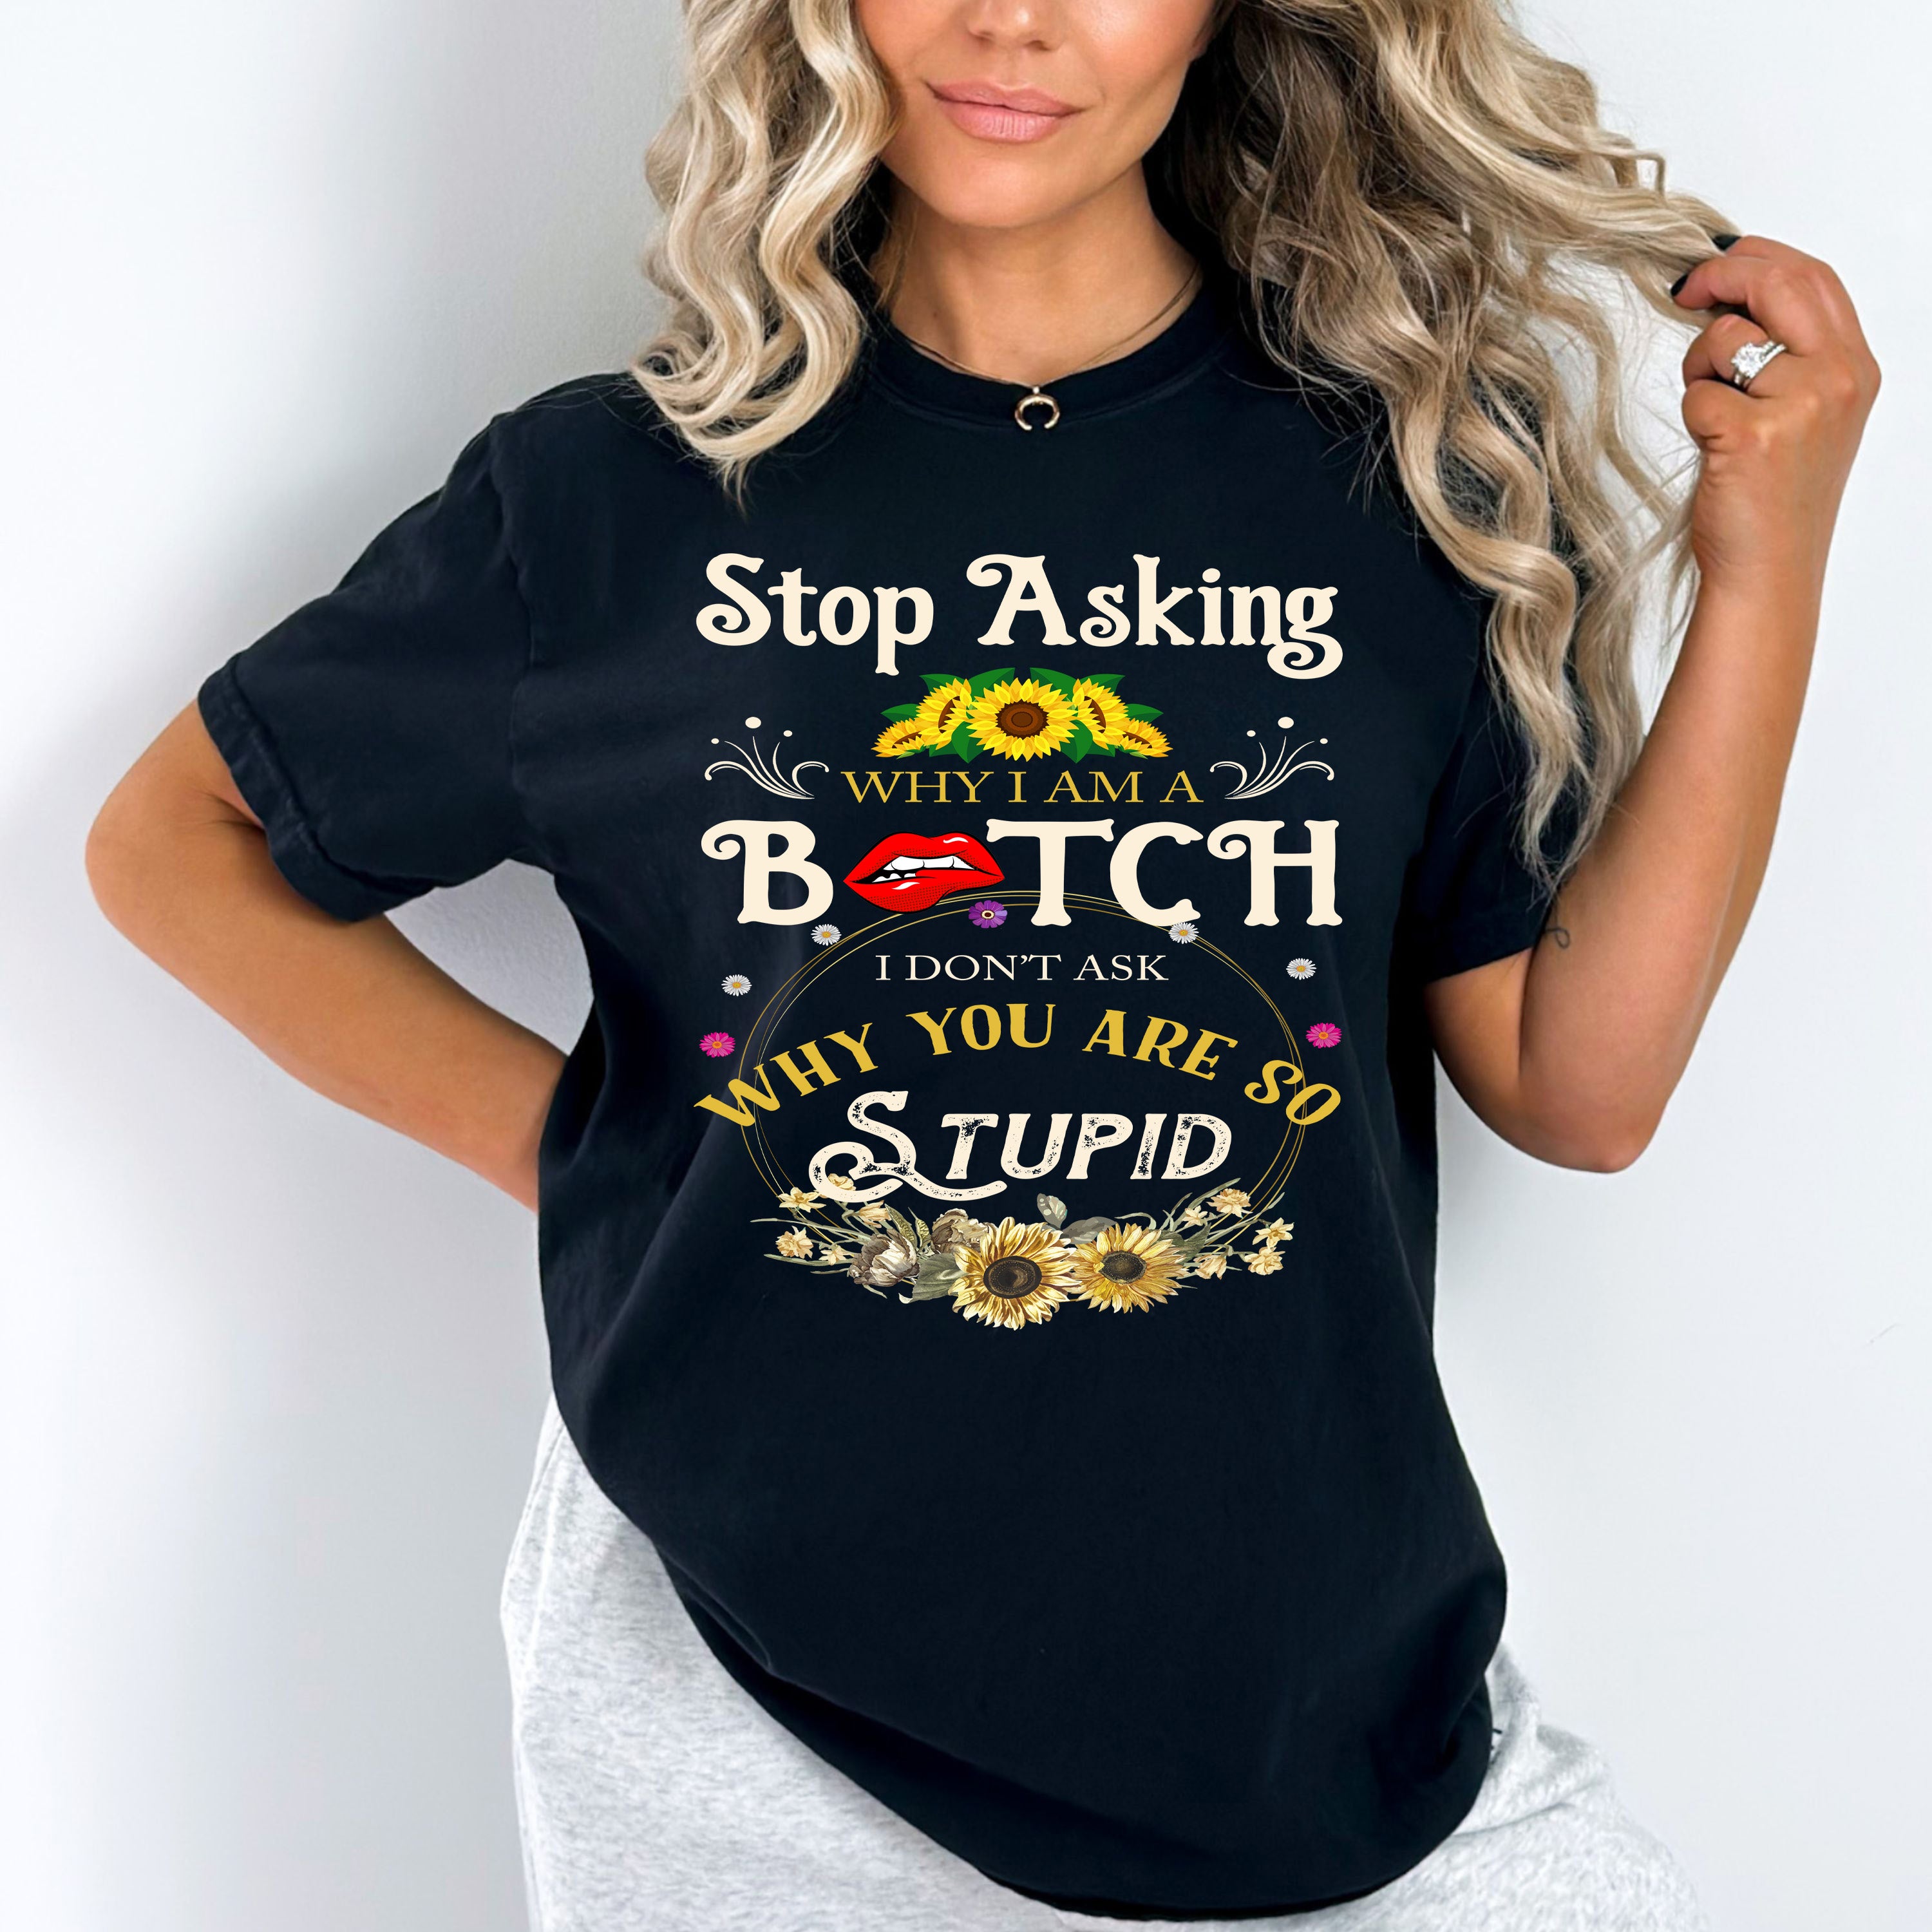 "Stop Asking Why I Am A Bitch"